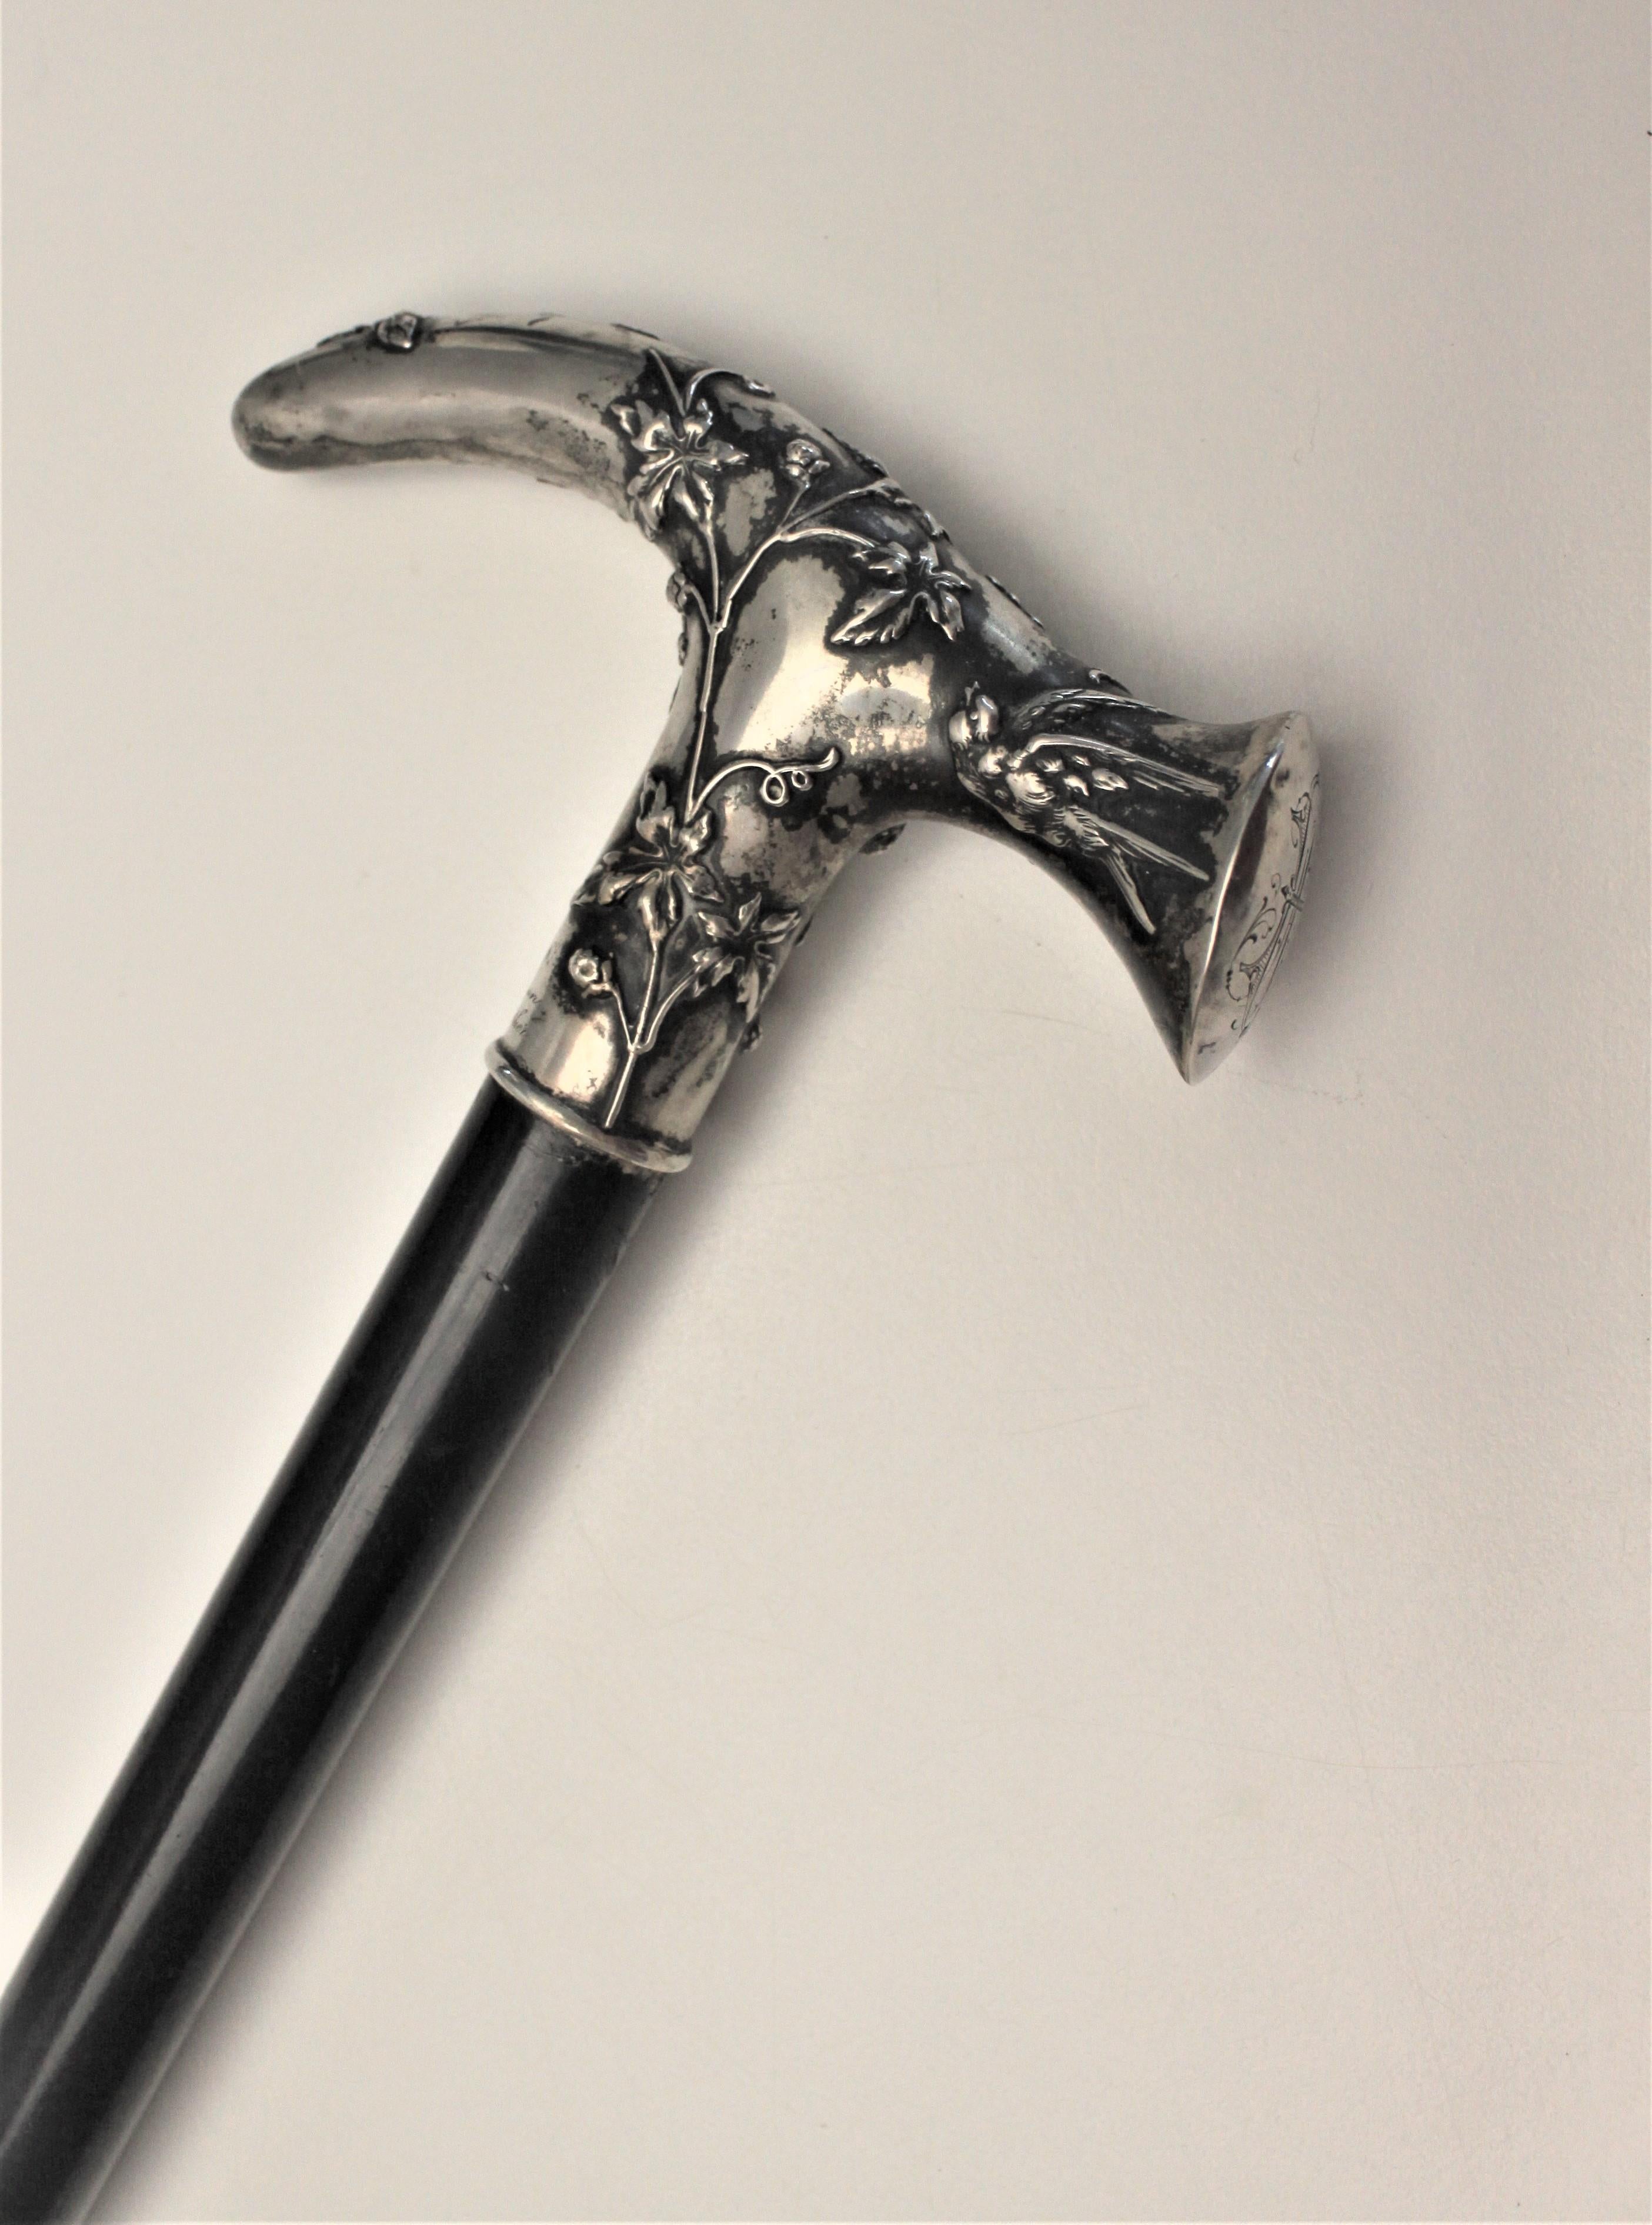 This cane is believed to have been made in England in approximately the year 1900 in the Victorian style. The cane has a sterling silver handle with ornate and intricately embossed vine decoration which functions as a grip when in use. The cane